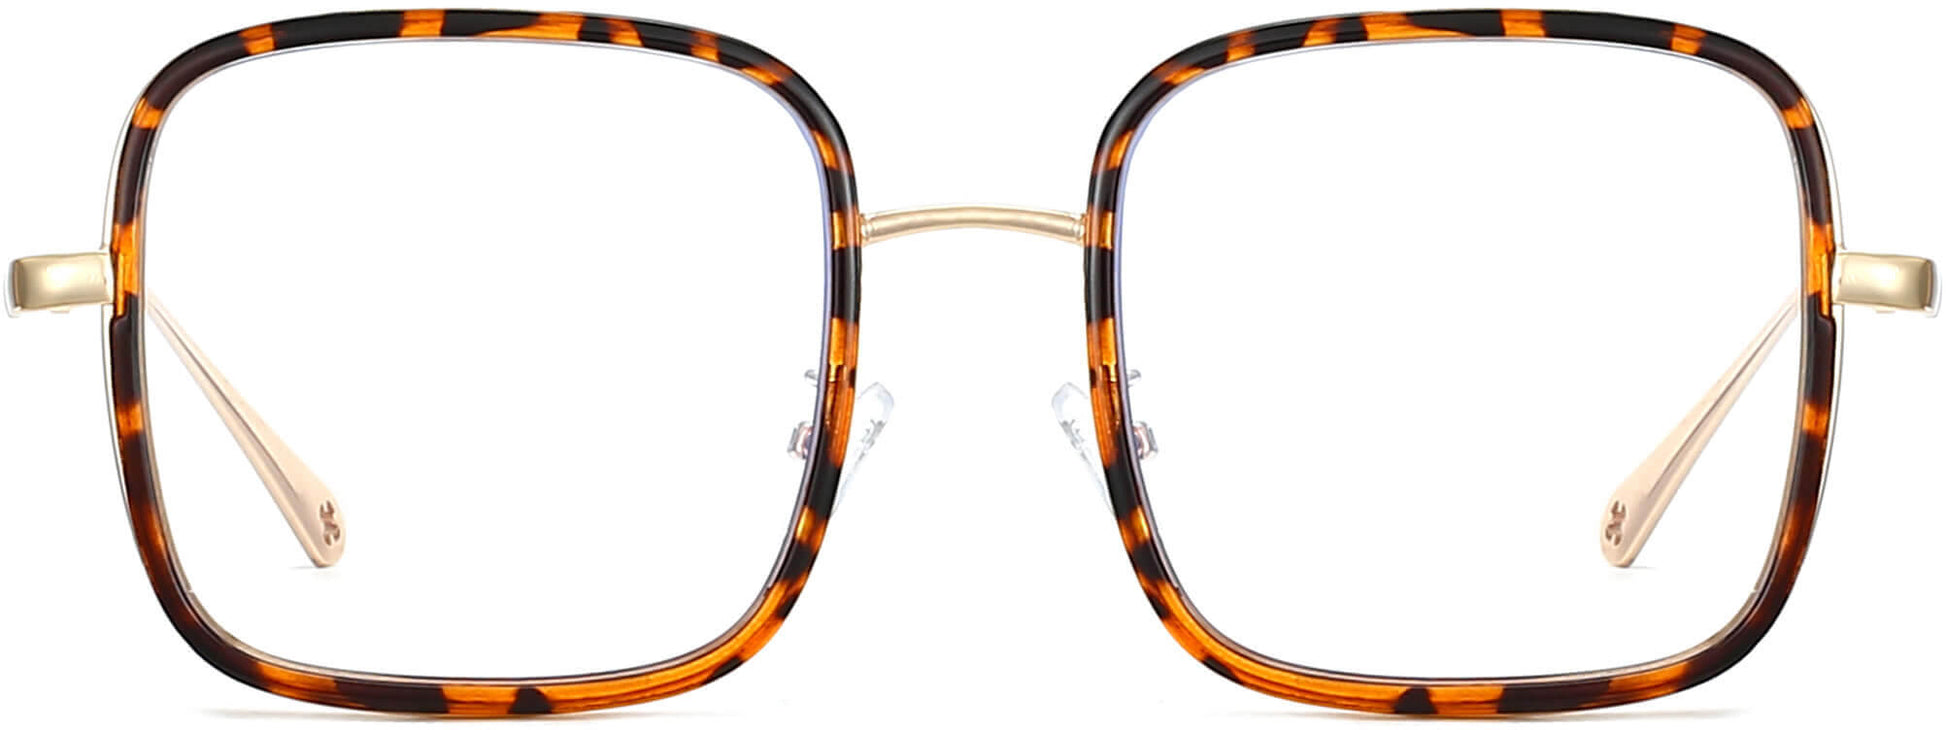 Diordie Square Tortoise Eyeglasses from ANRRI, front view